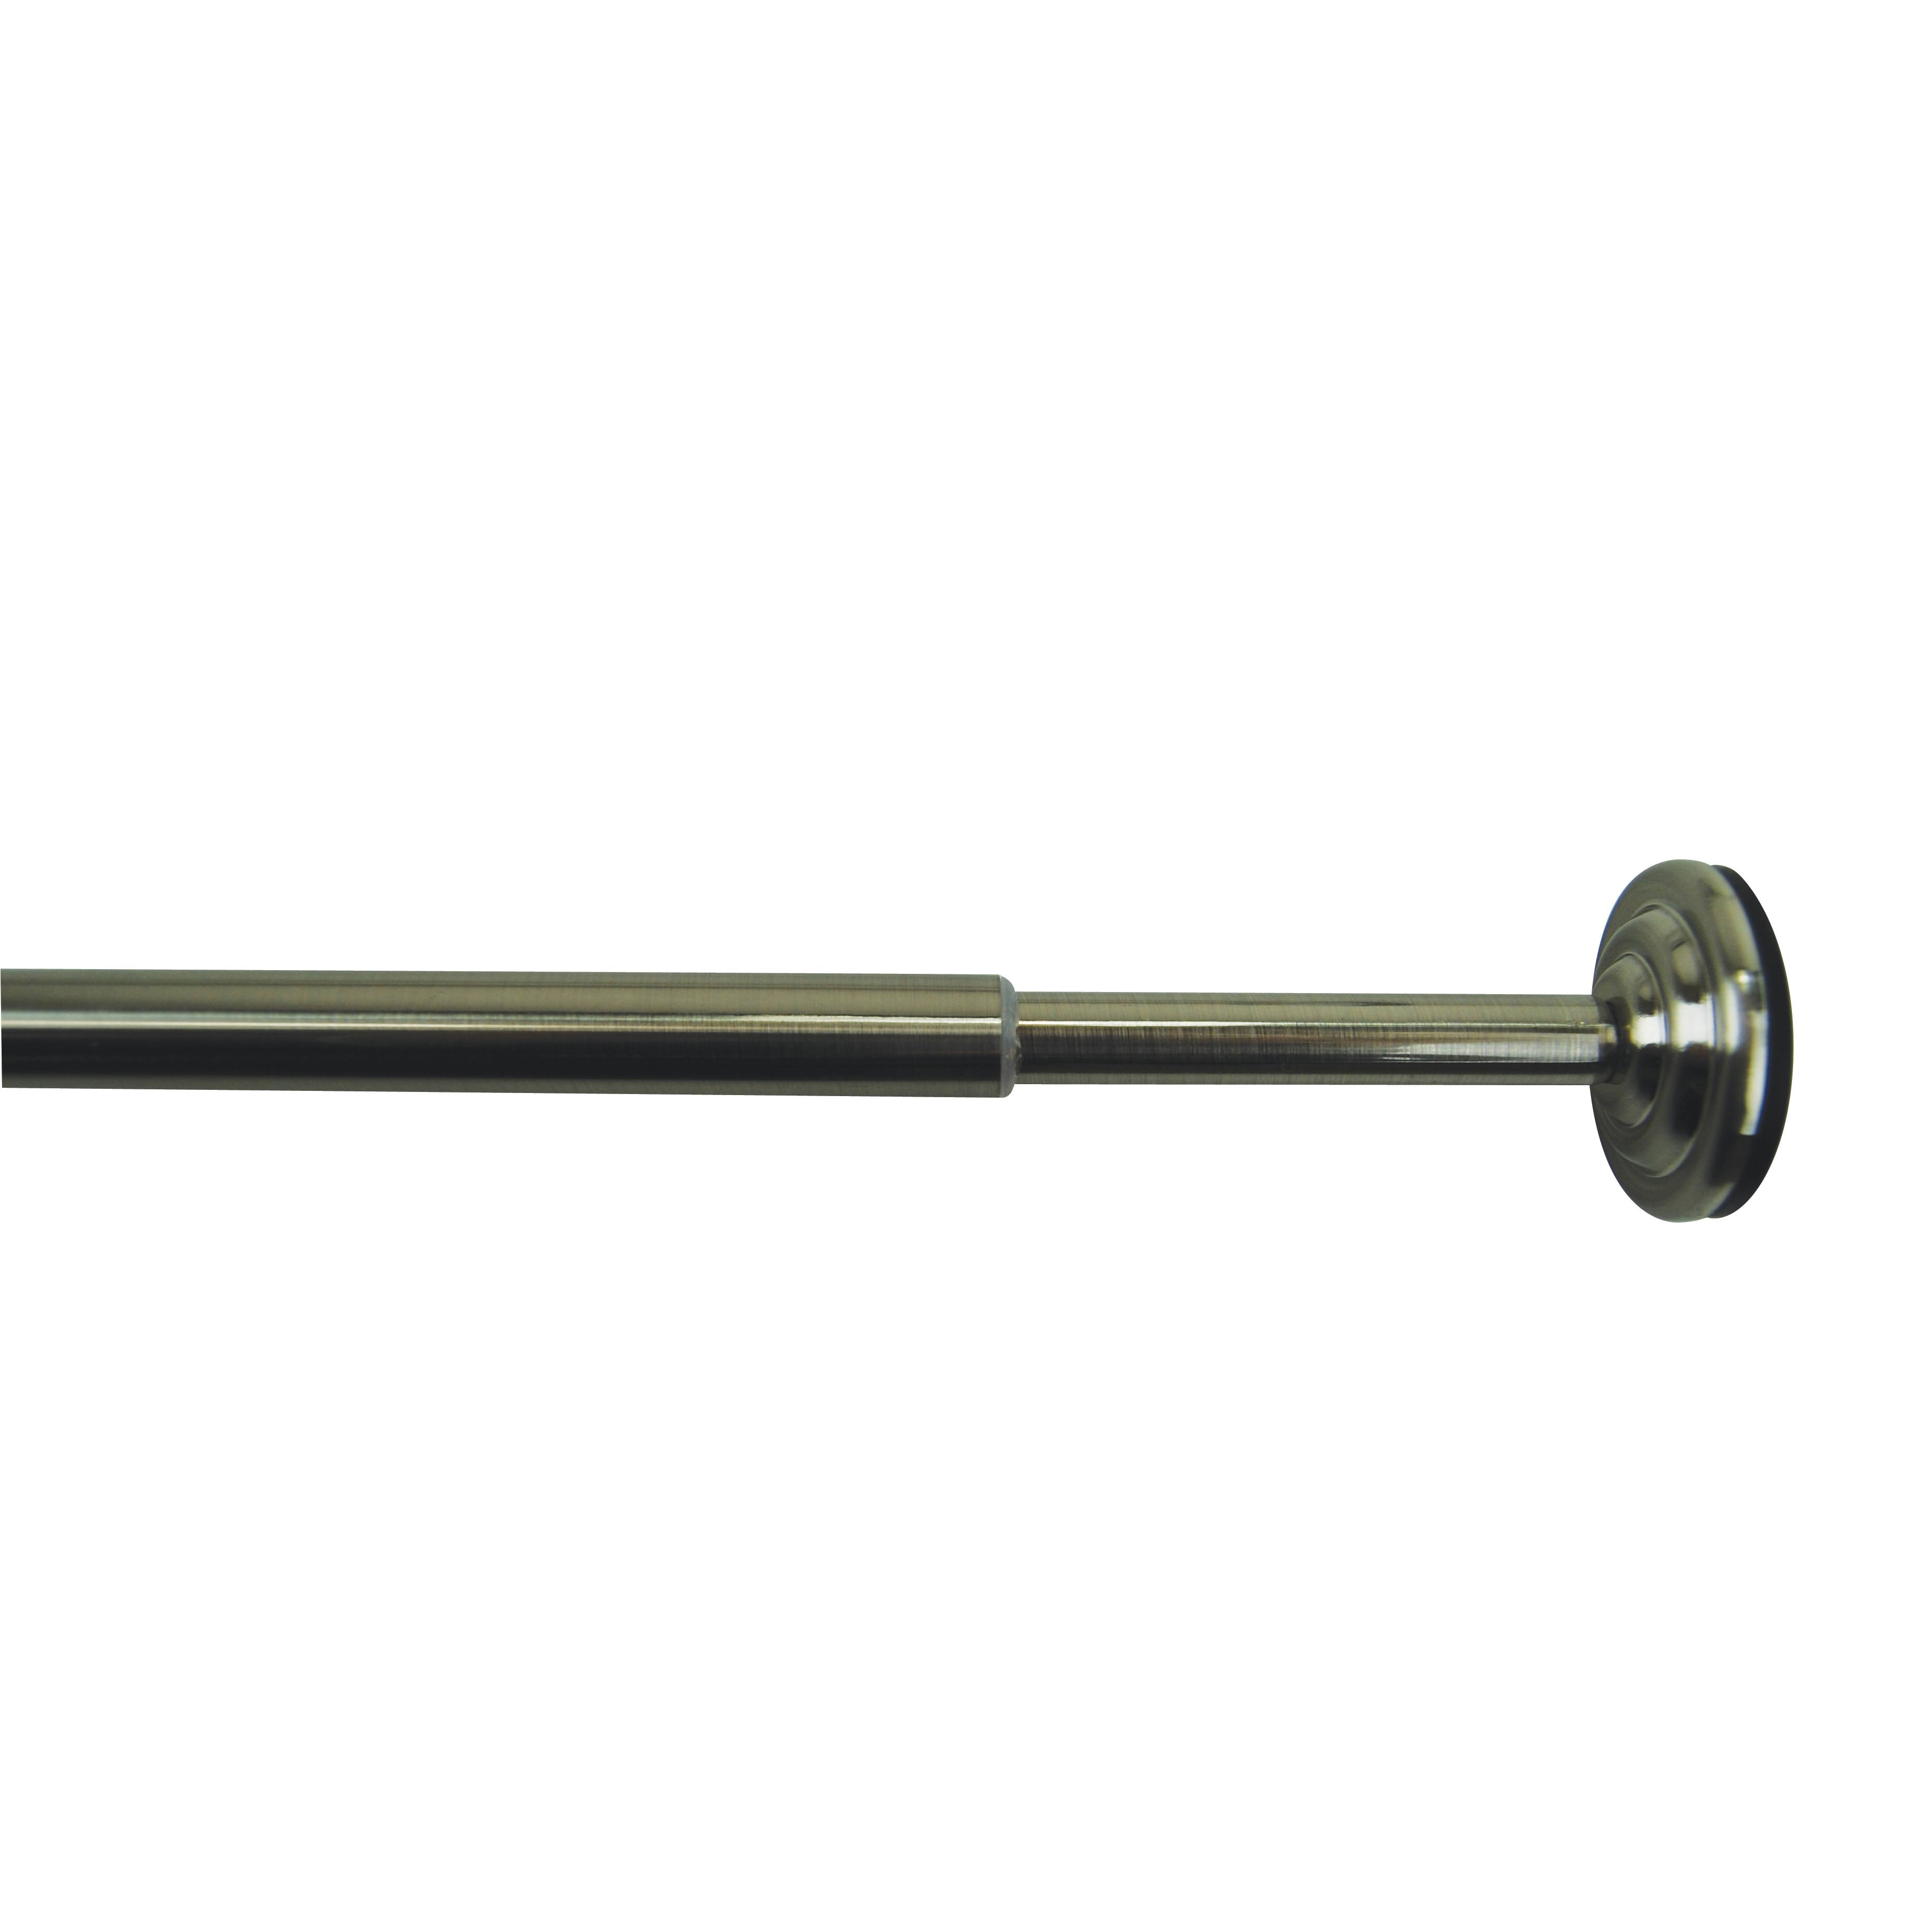 Versailles Home Fashions MTR2436-903 0.5 In. Tension Rod 24-36 In. - Brushed Nickel